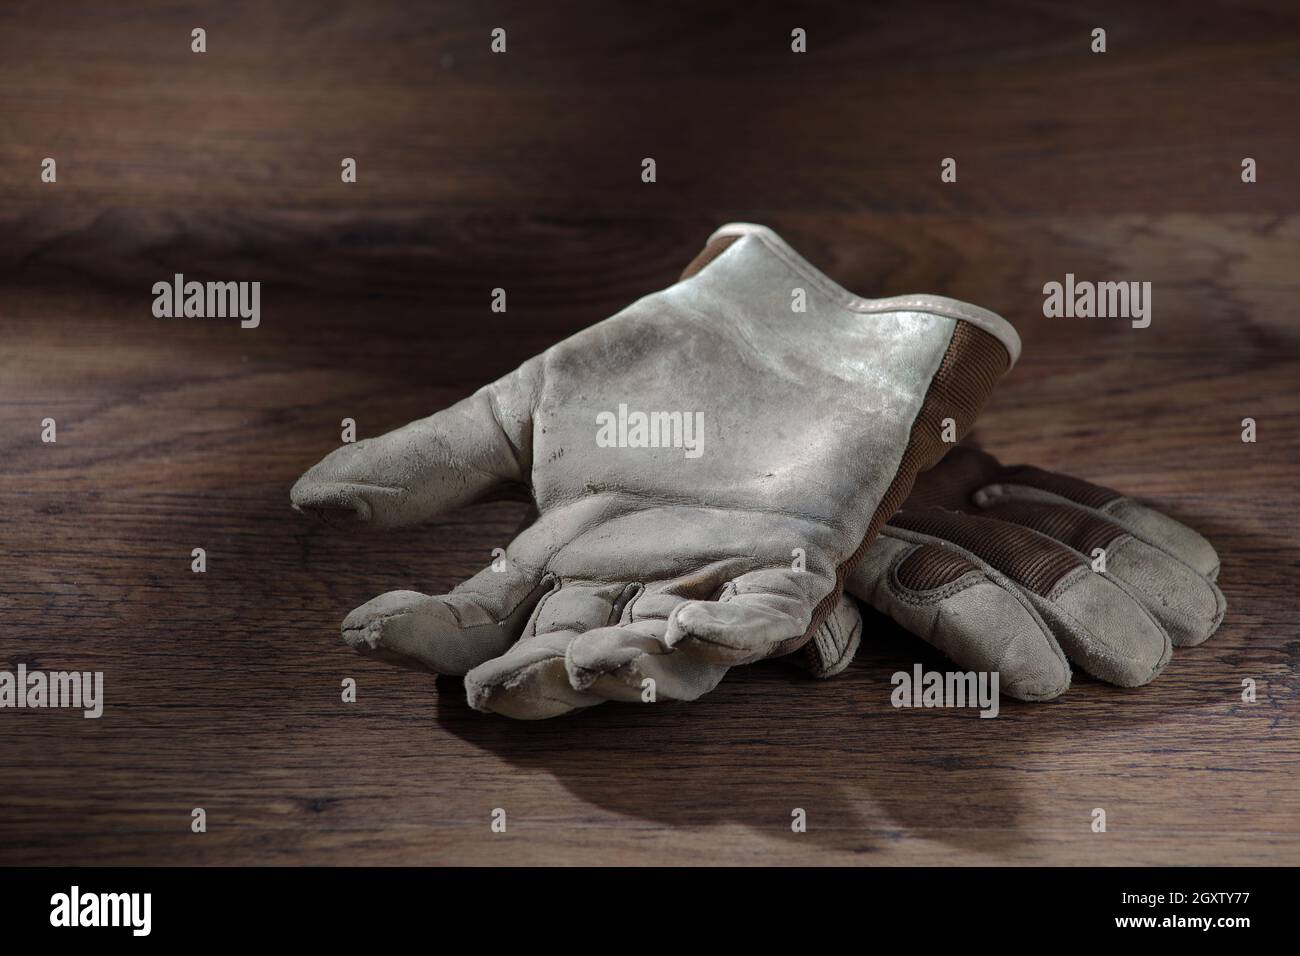 https://c8.alamy.com/comp/2GXTY77/a-pair-of-work-gloves-on-a-wood-surface-with-window-light-2GXTY77.jpg